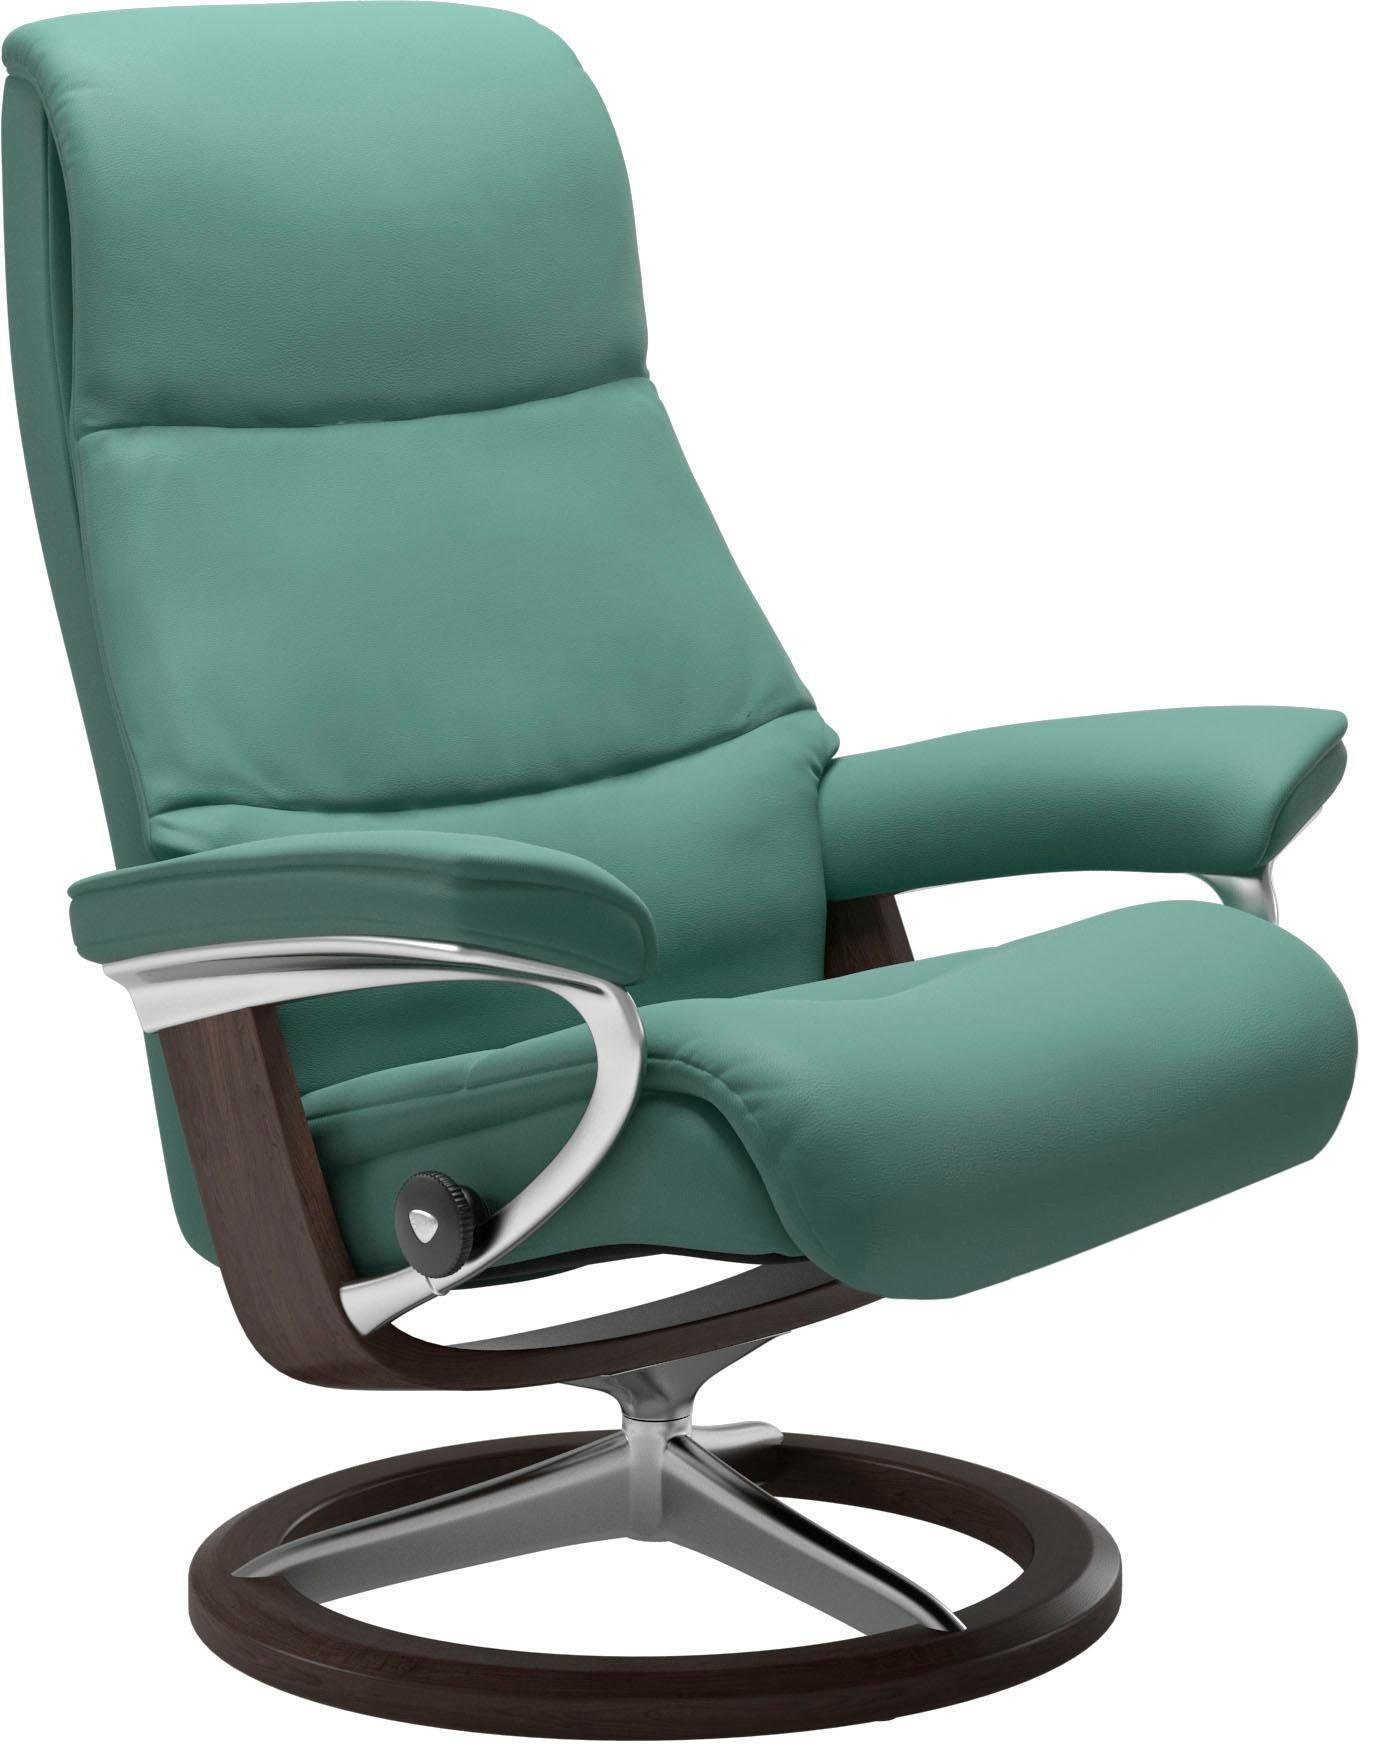 L,Gestell Relaxsessel Größe Signature Base, Stressless® View, Wenge mit